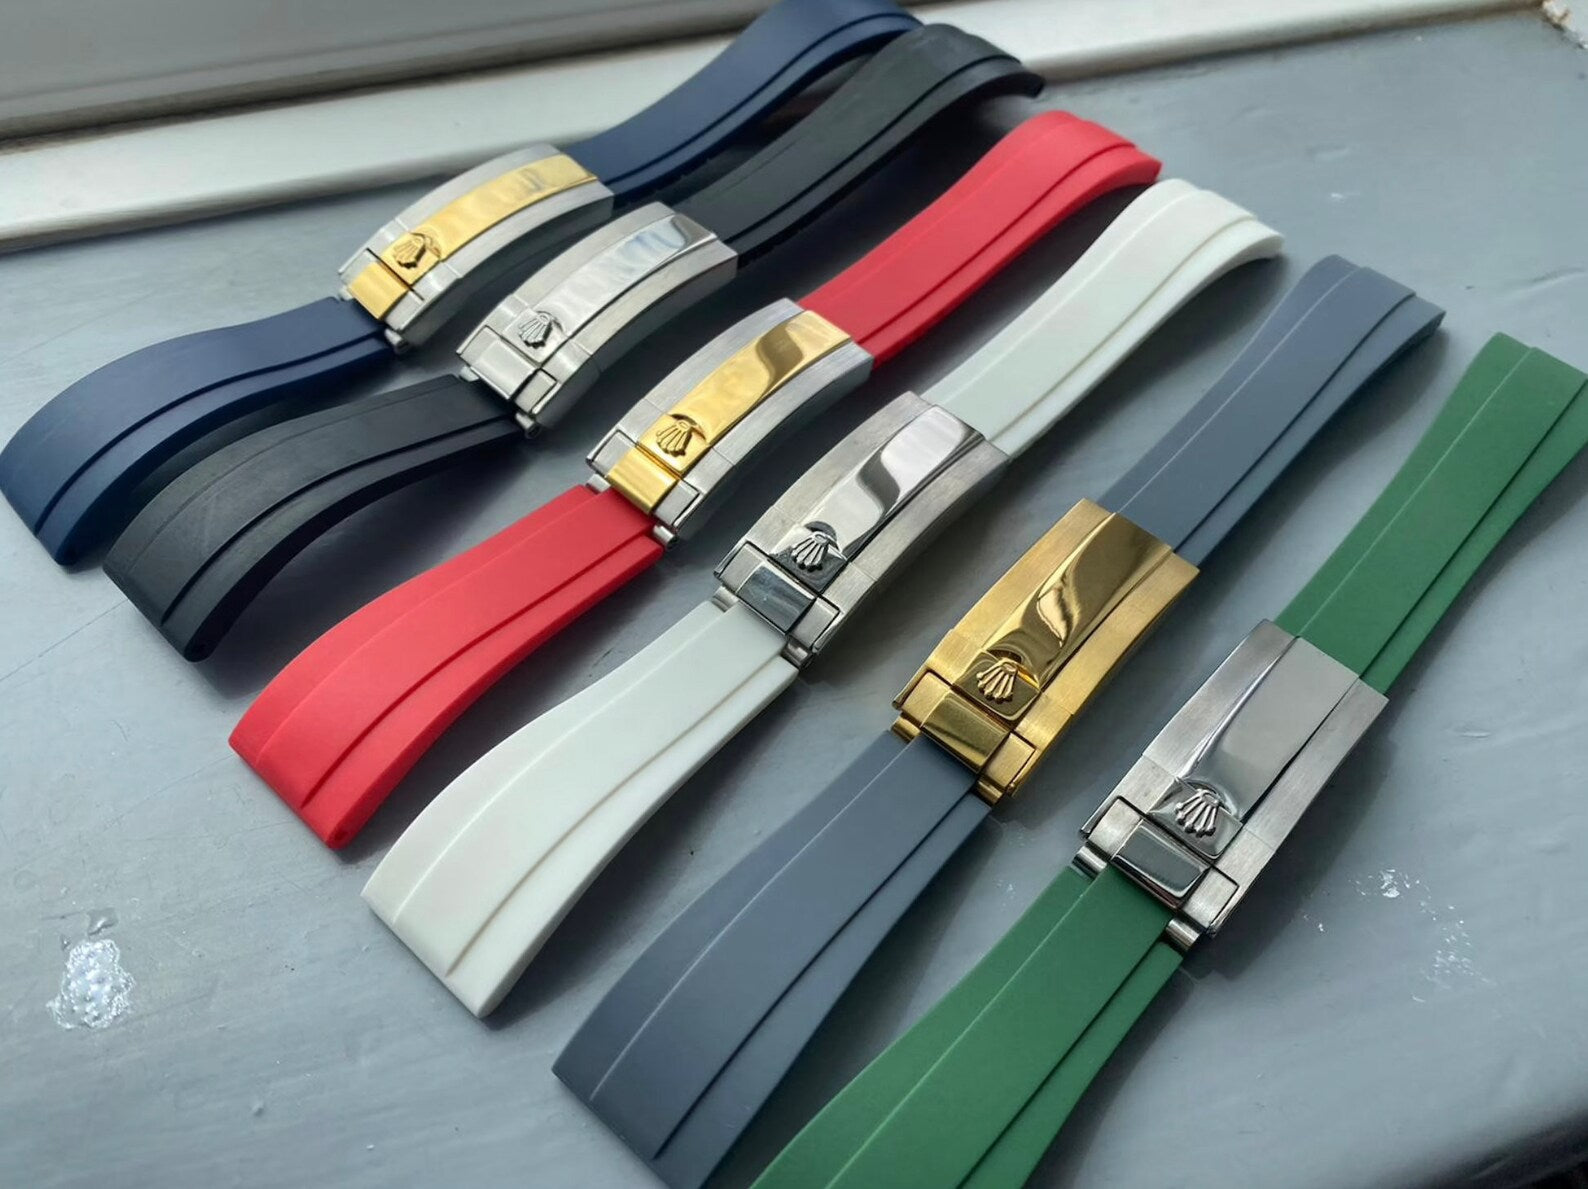 RSP Oyster Perpetual - Rubber Watch Band for Rolex with Oysterclasp